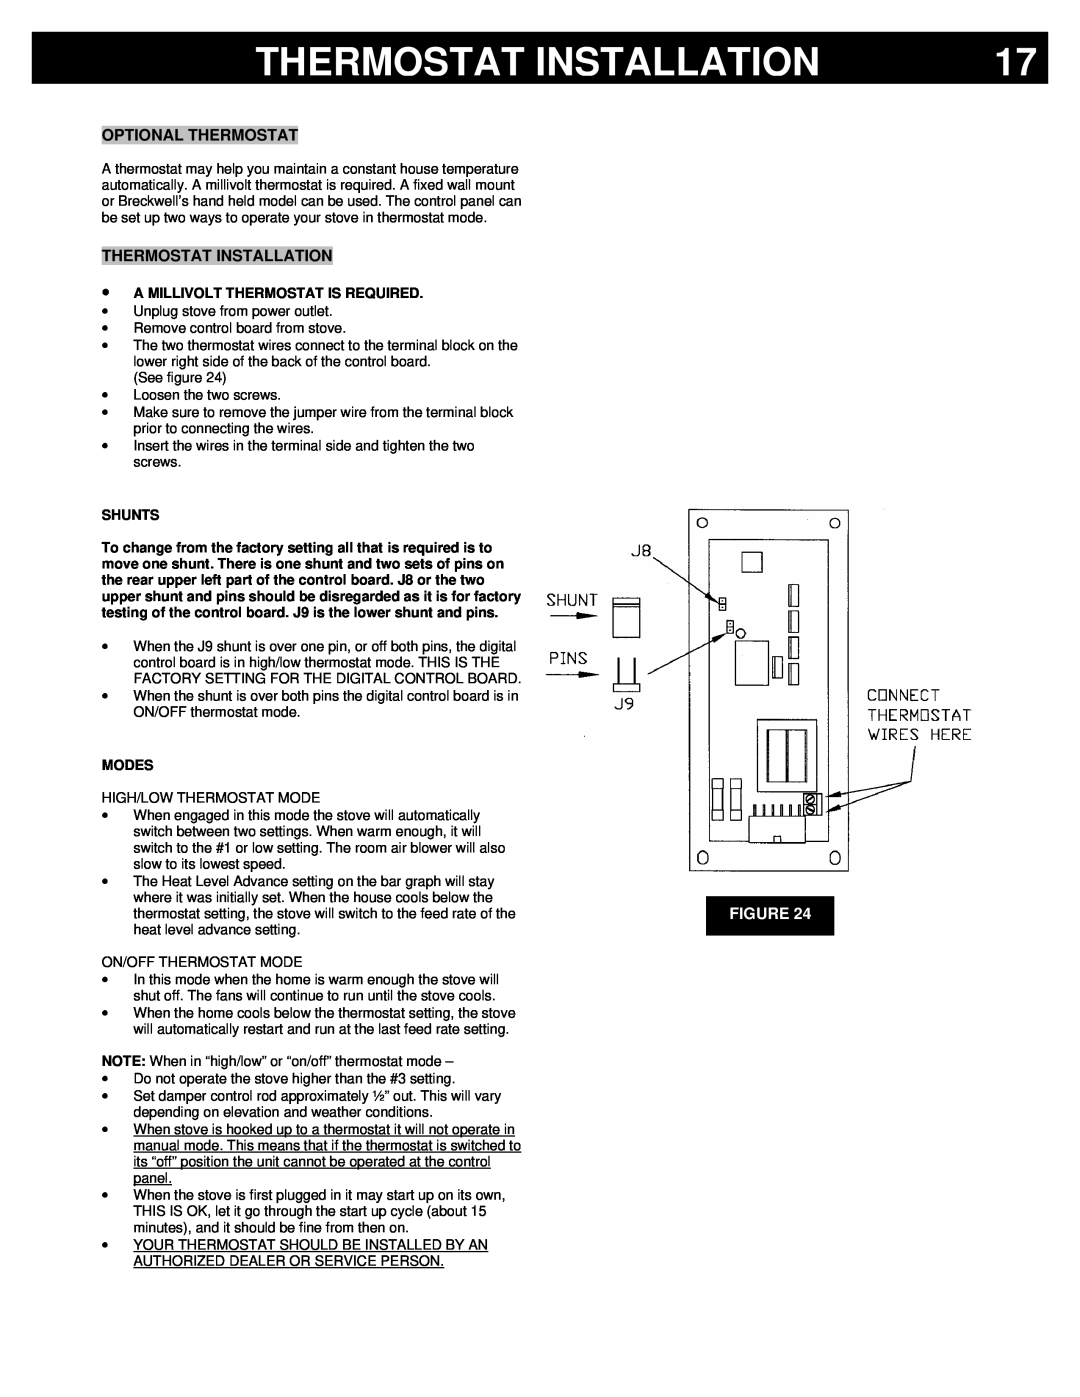 Breckwell P22FSA, P22FSL, P22I owner manual Thermostat Installation, ∙A Millivolt Thermostat Is Required, Shunts, Modes 